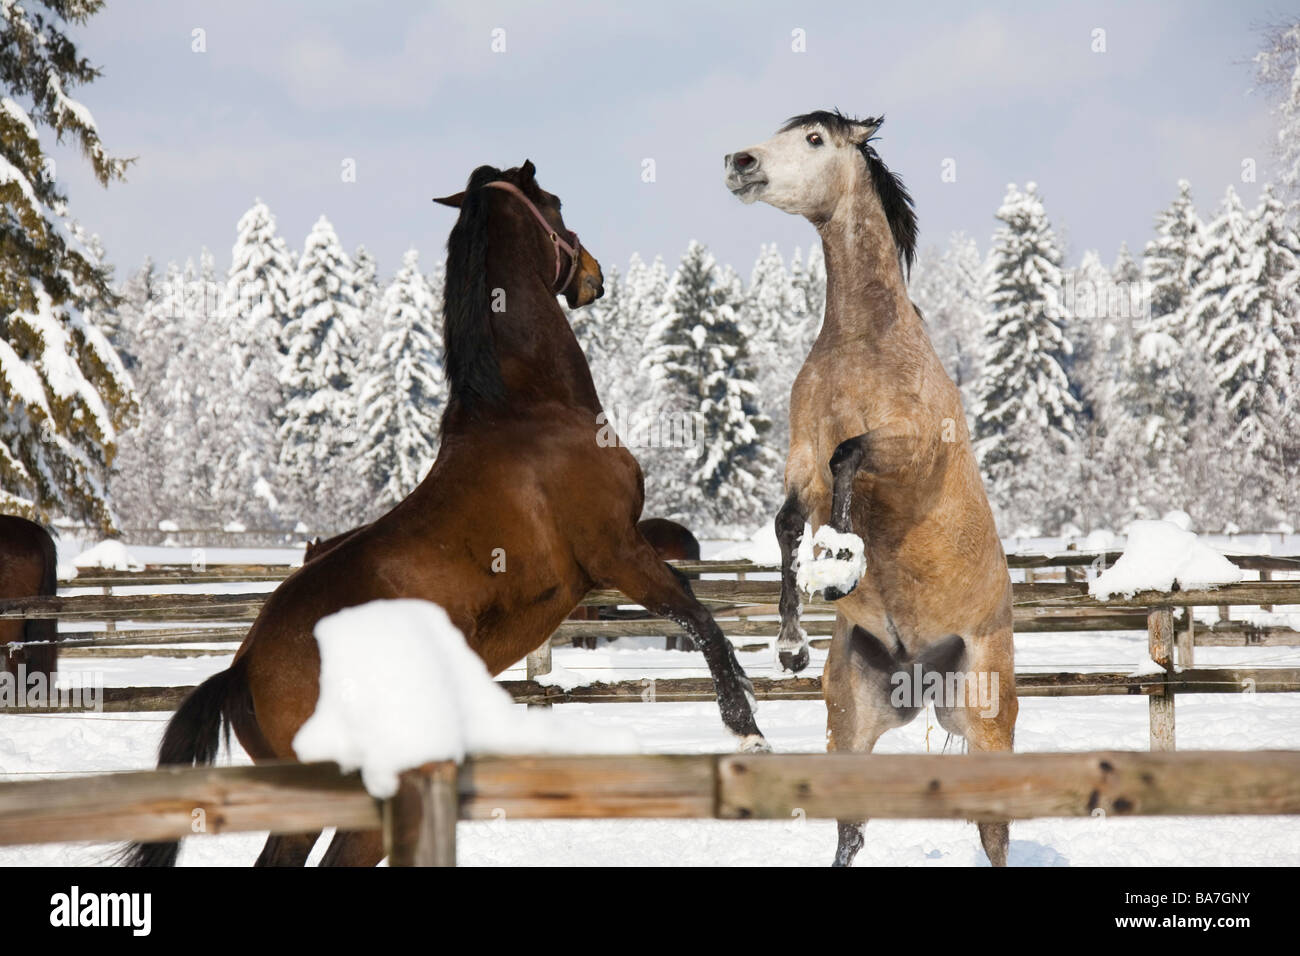 Horses fighting in a winter landscape, Germany Stock Photo